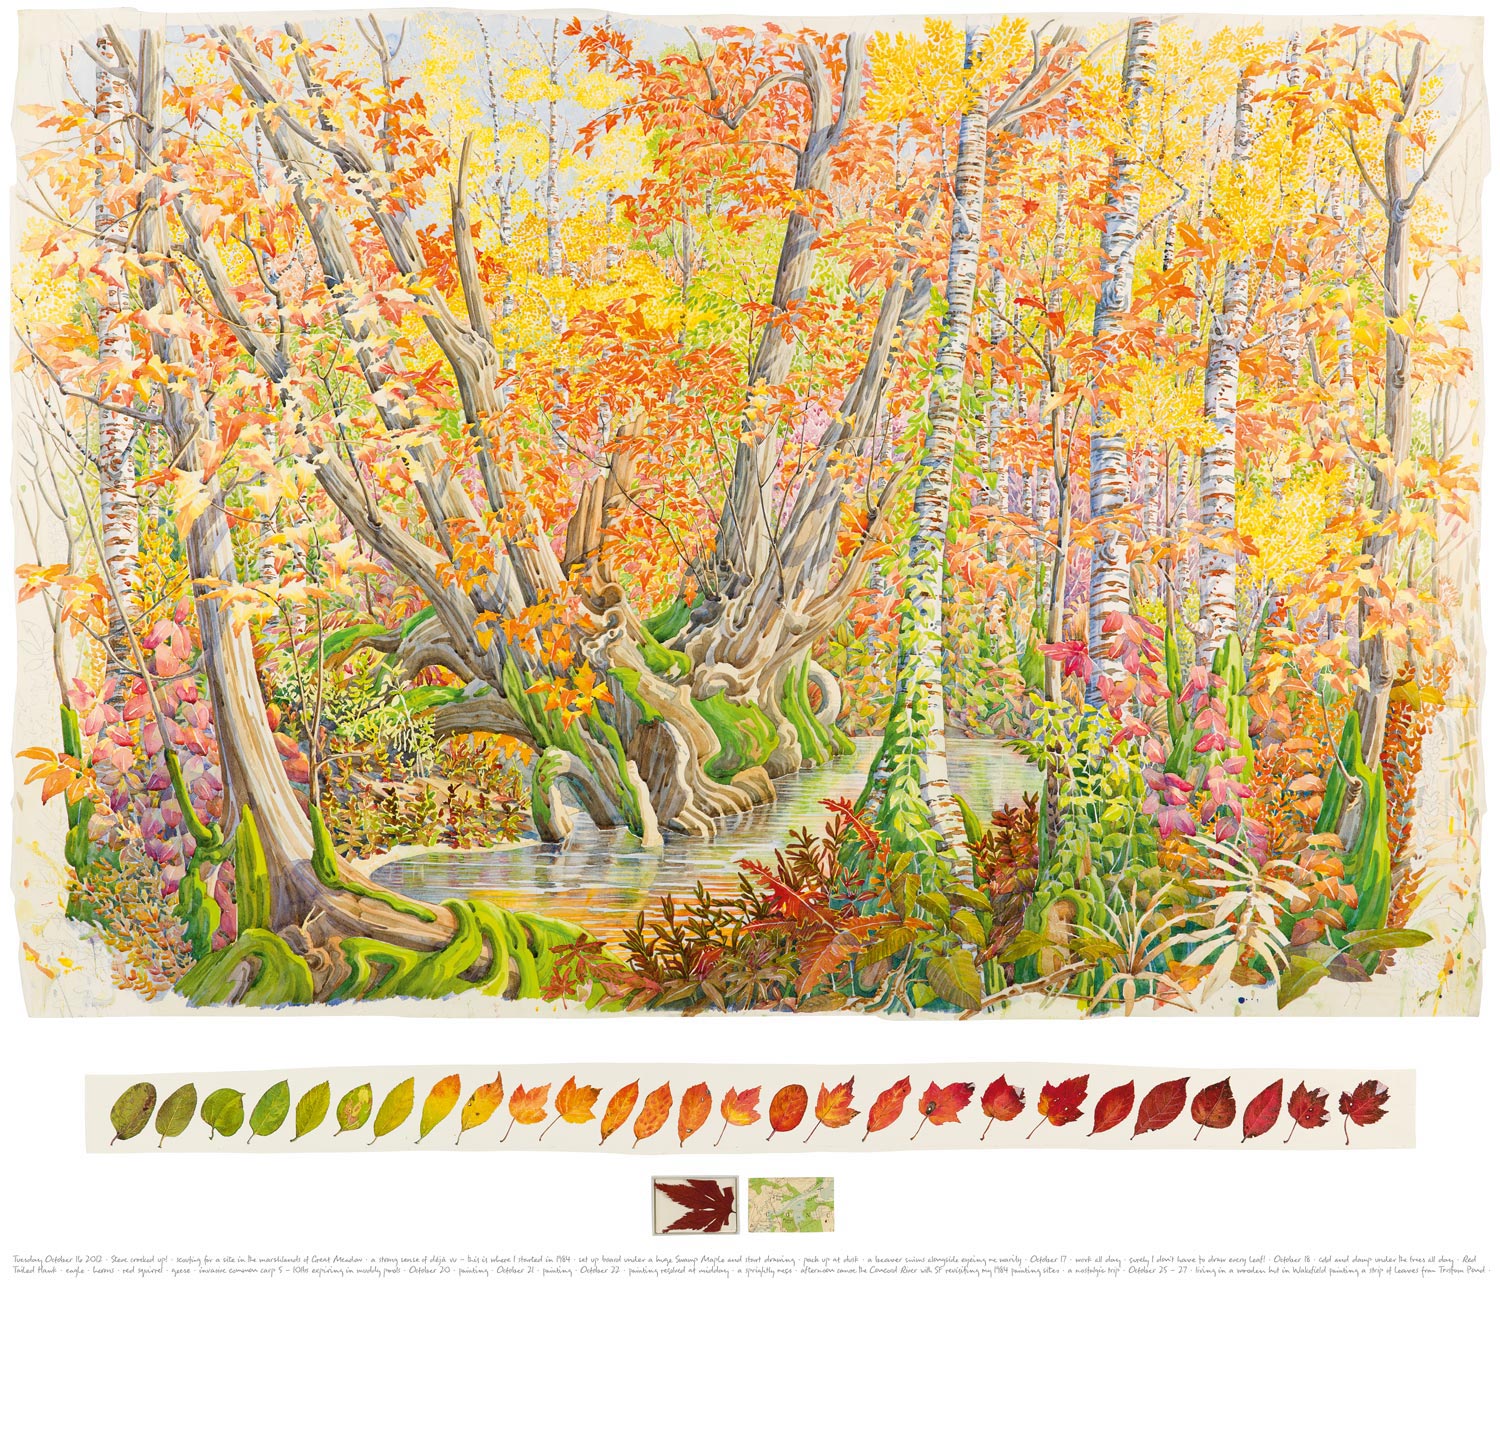   Tony Foster ,  Fall Colour in Great Meadow, Concord , 2012 